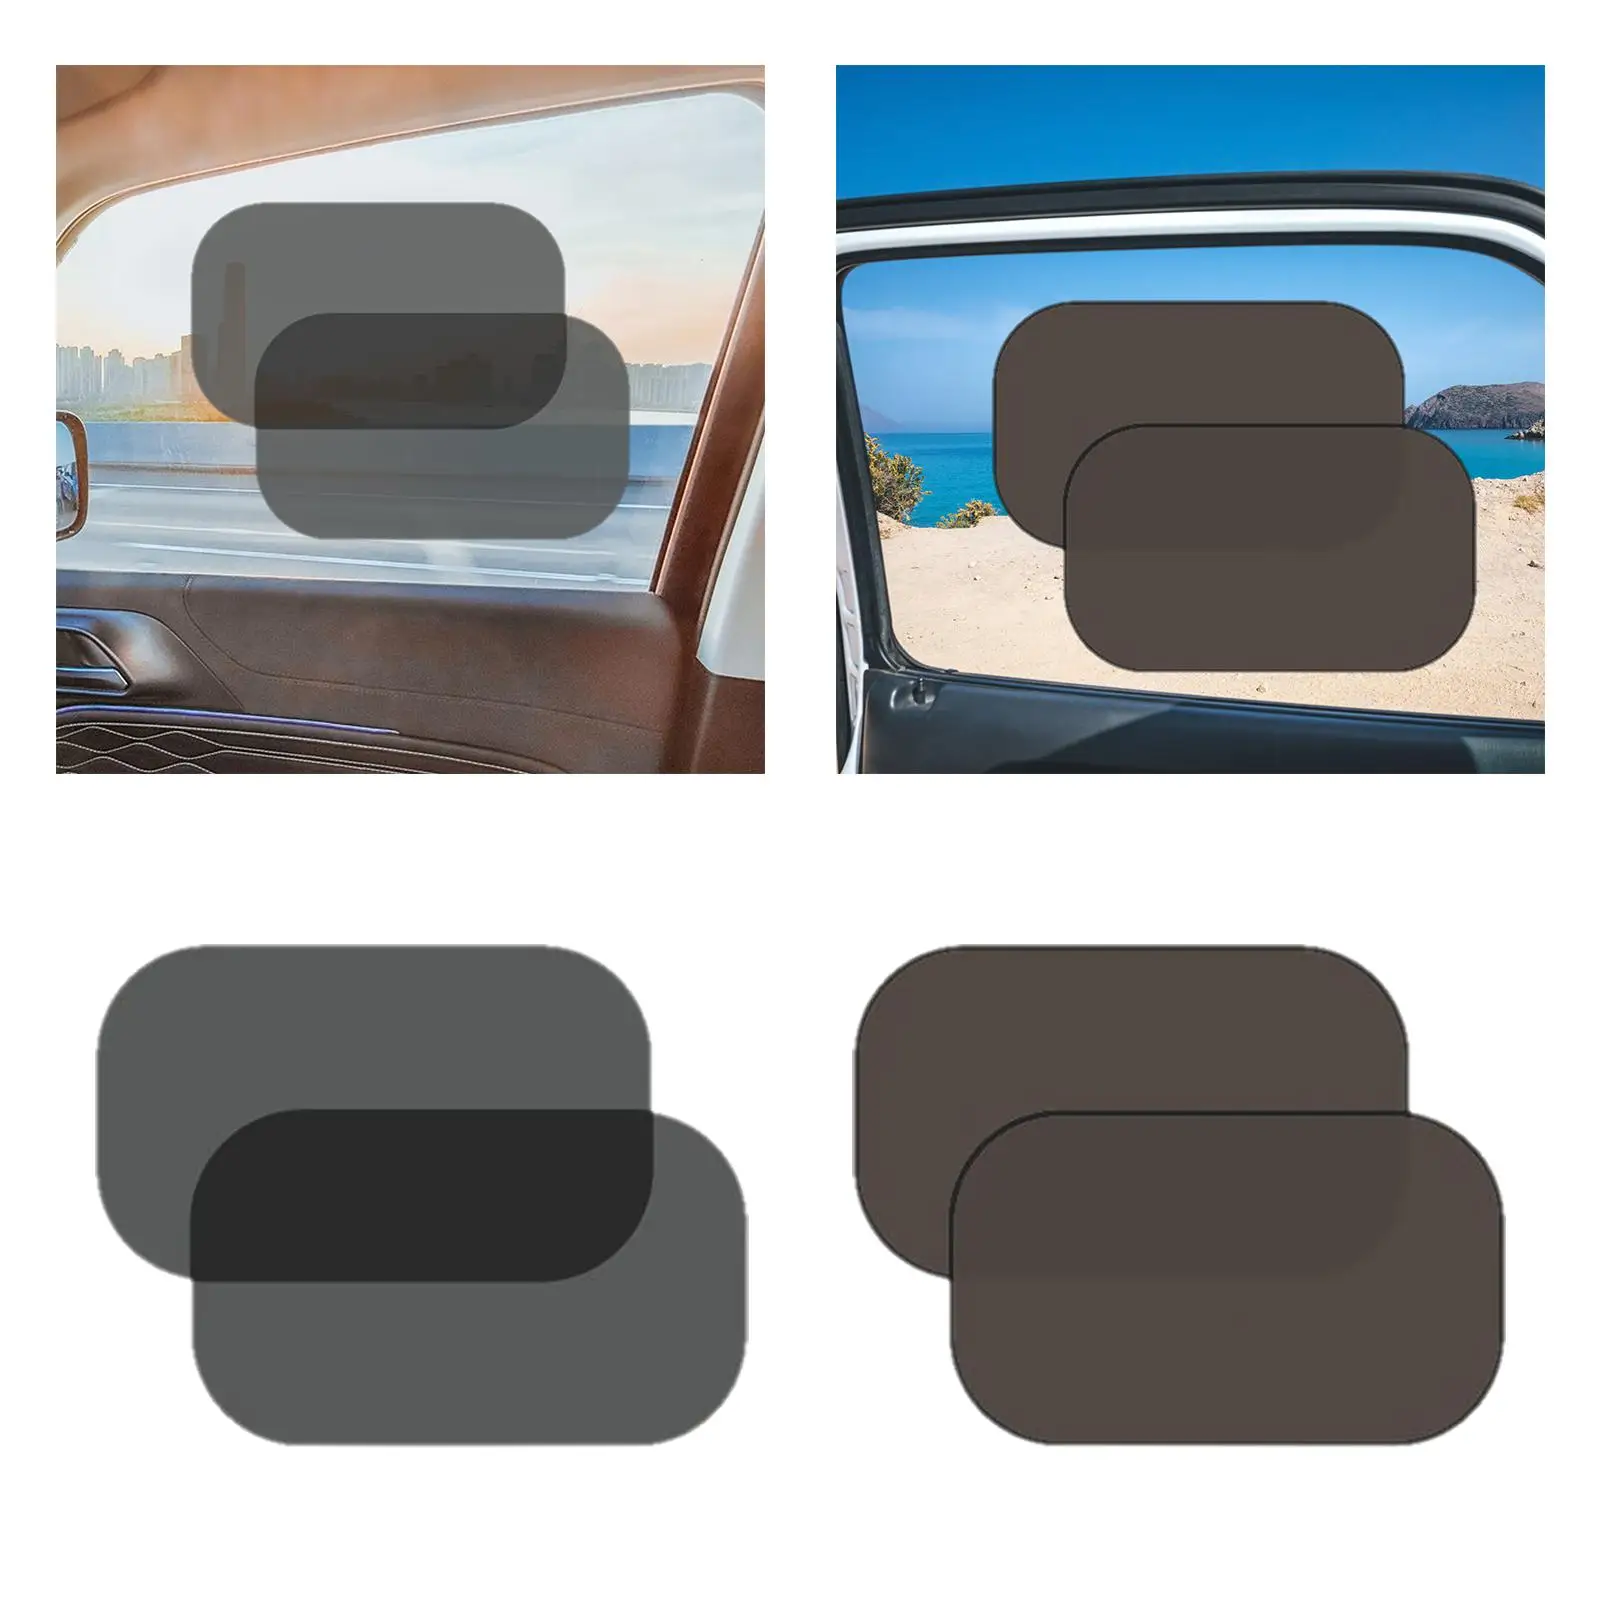 2x Car Side Window Sunshades Interior Heat Shields Static Cling Sun Visor for Most Cars Easy Installation Car Accessories